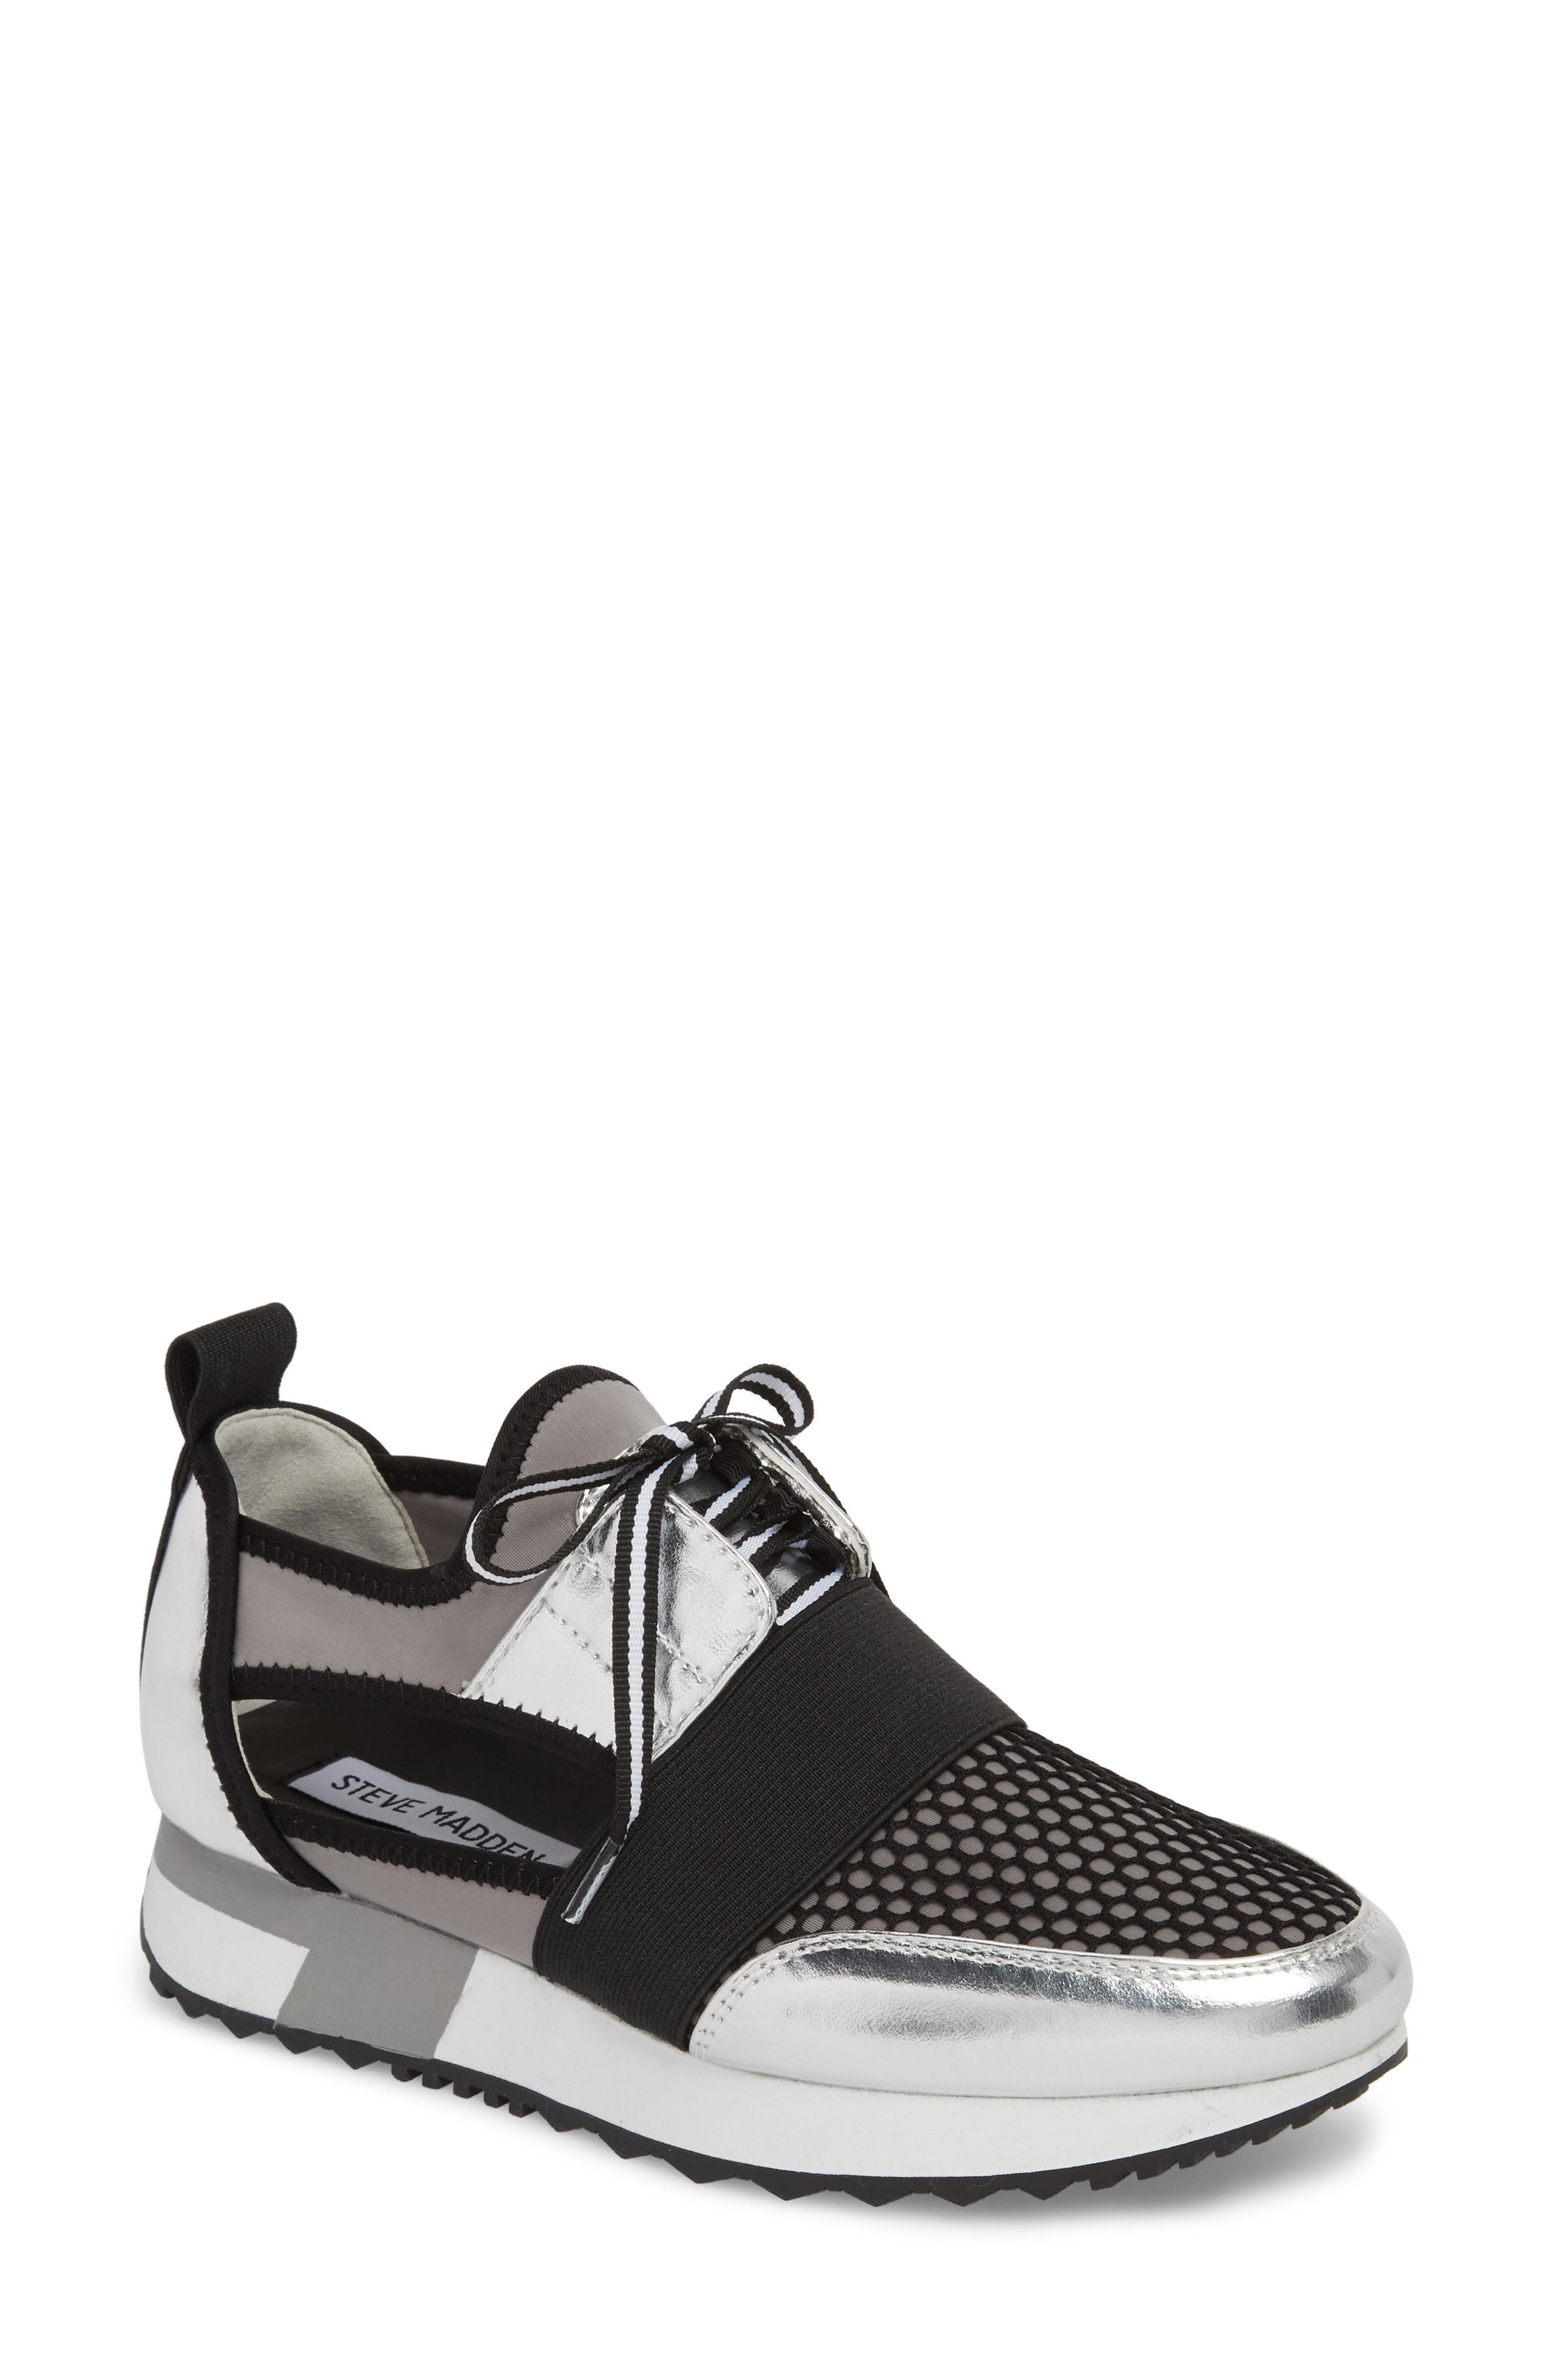 steve madden black and silver sneakers